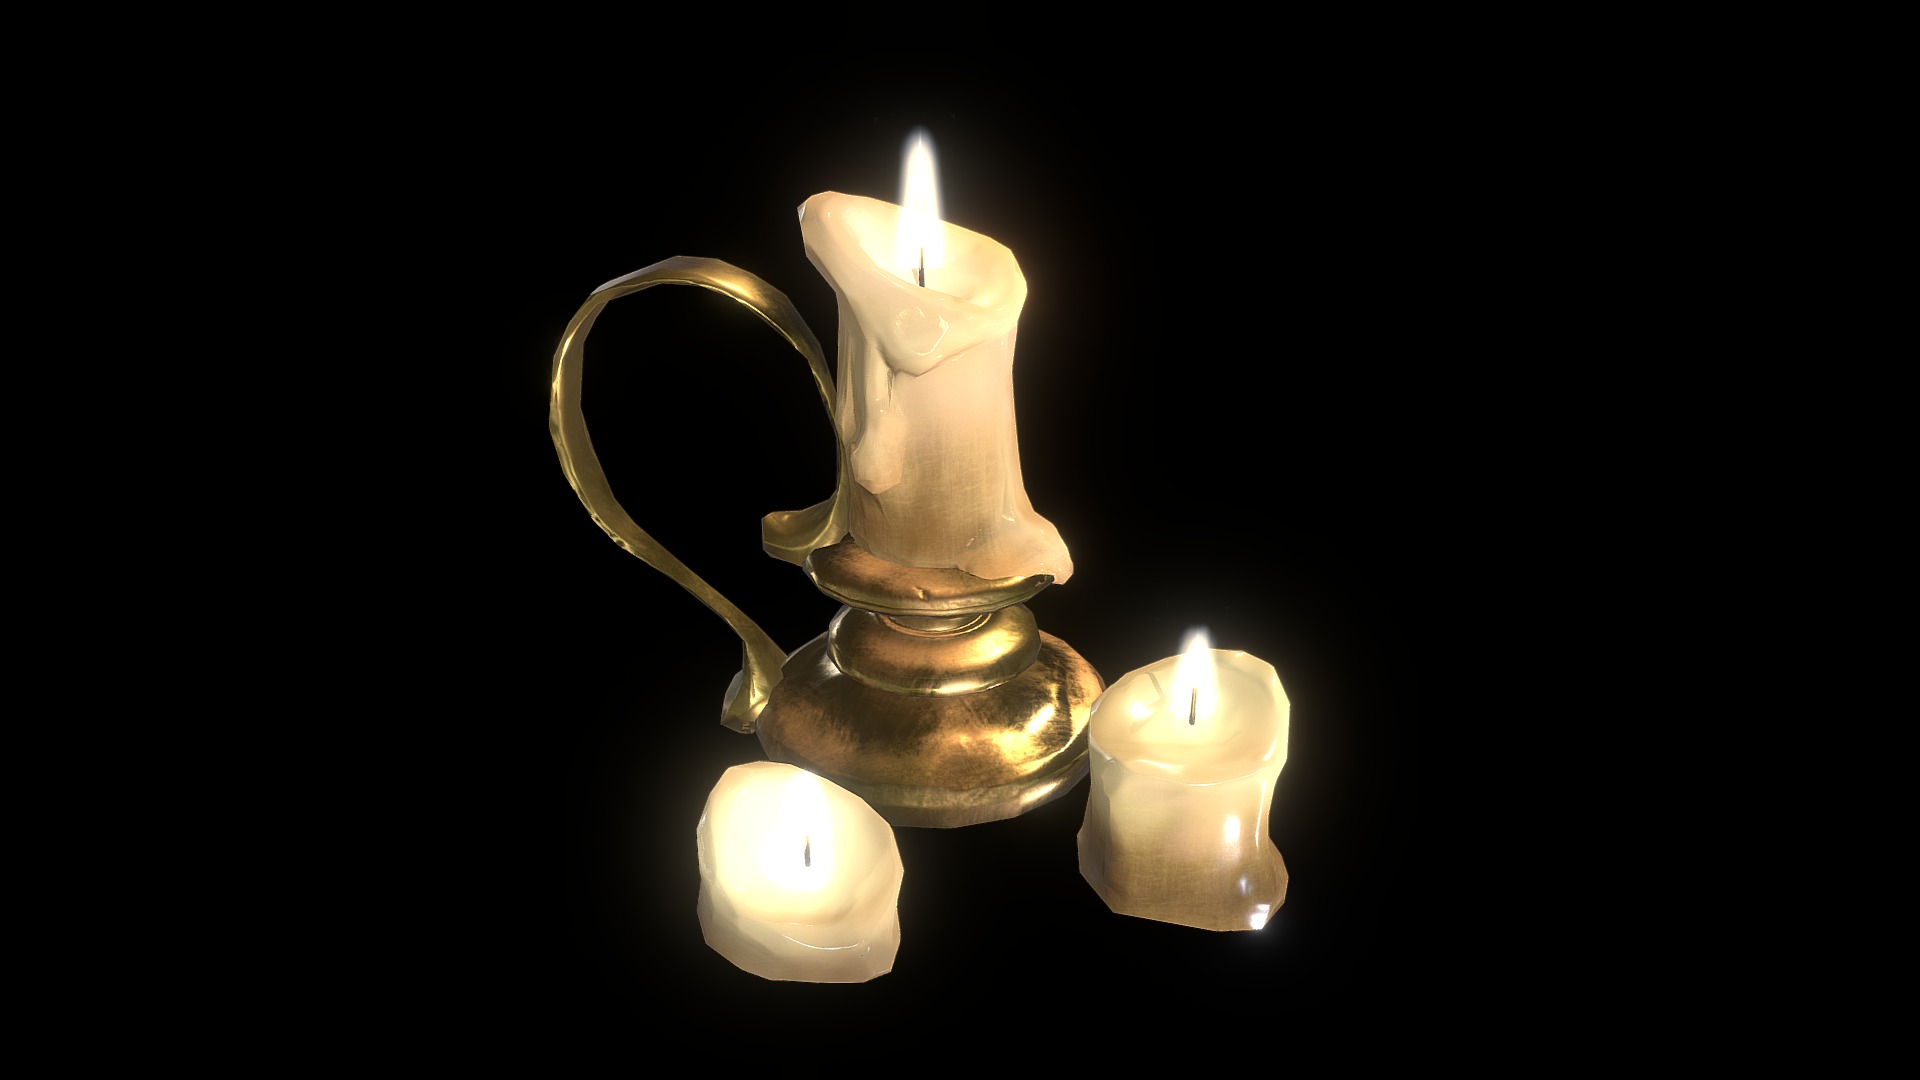 Another props for personal project 
Artstation:https://www.artstation.com/vaffle
Also follow me on instagaram: https://www.instagram.com/hamstrissimo/ (daily WIPs) - Candles - Download Free 3D model by Oleaf (@homkahom0) 3d model